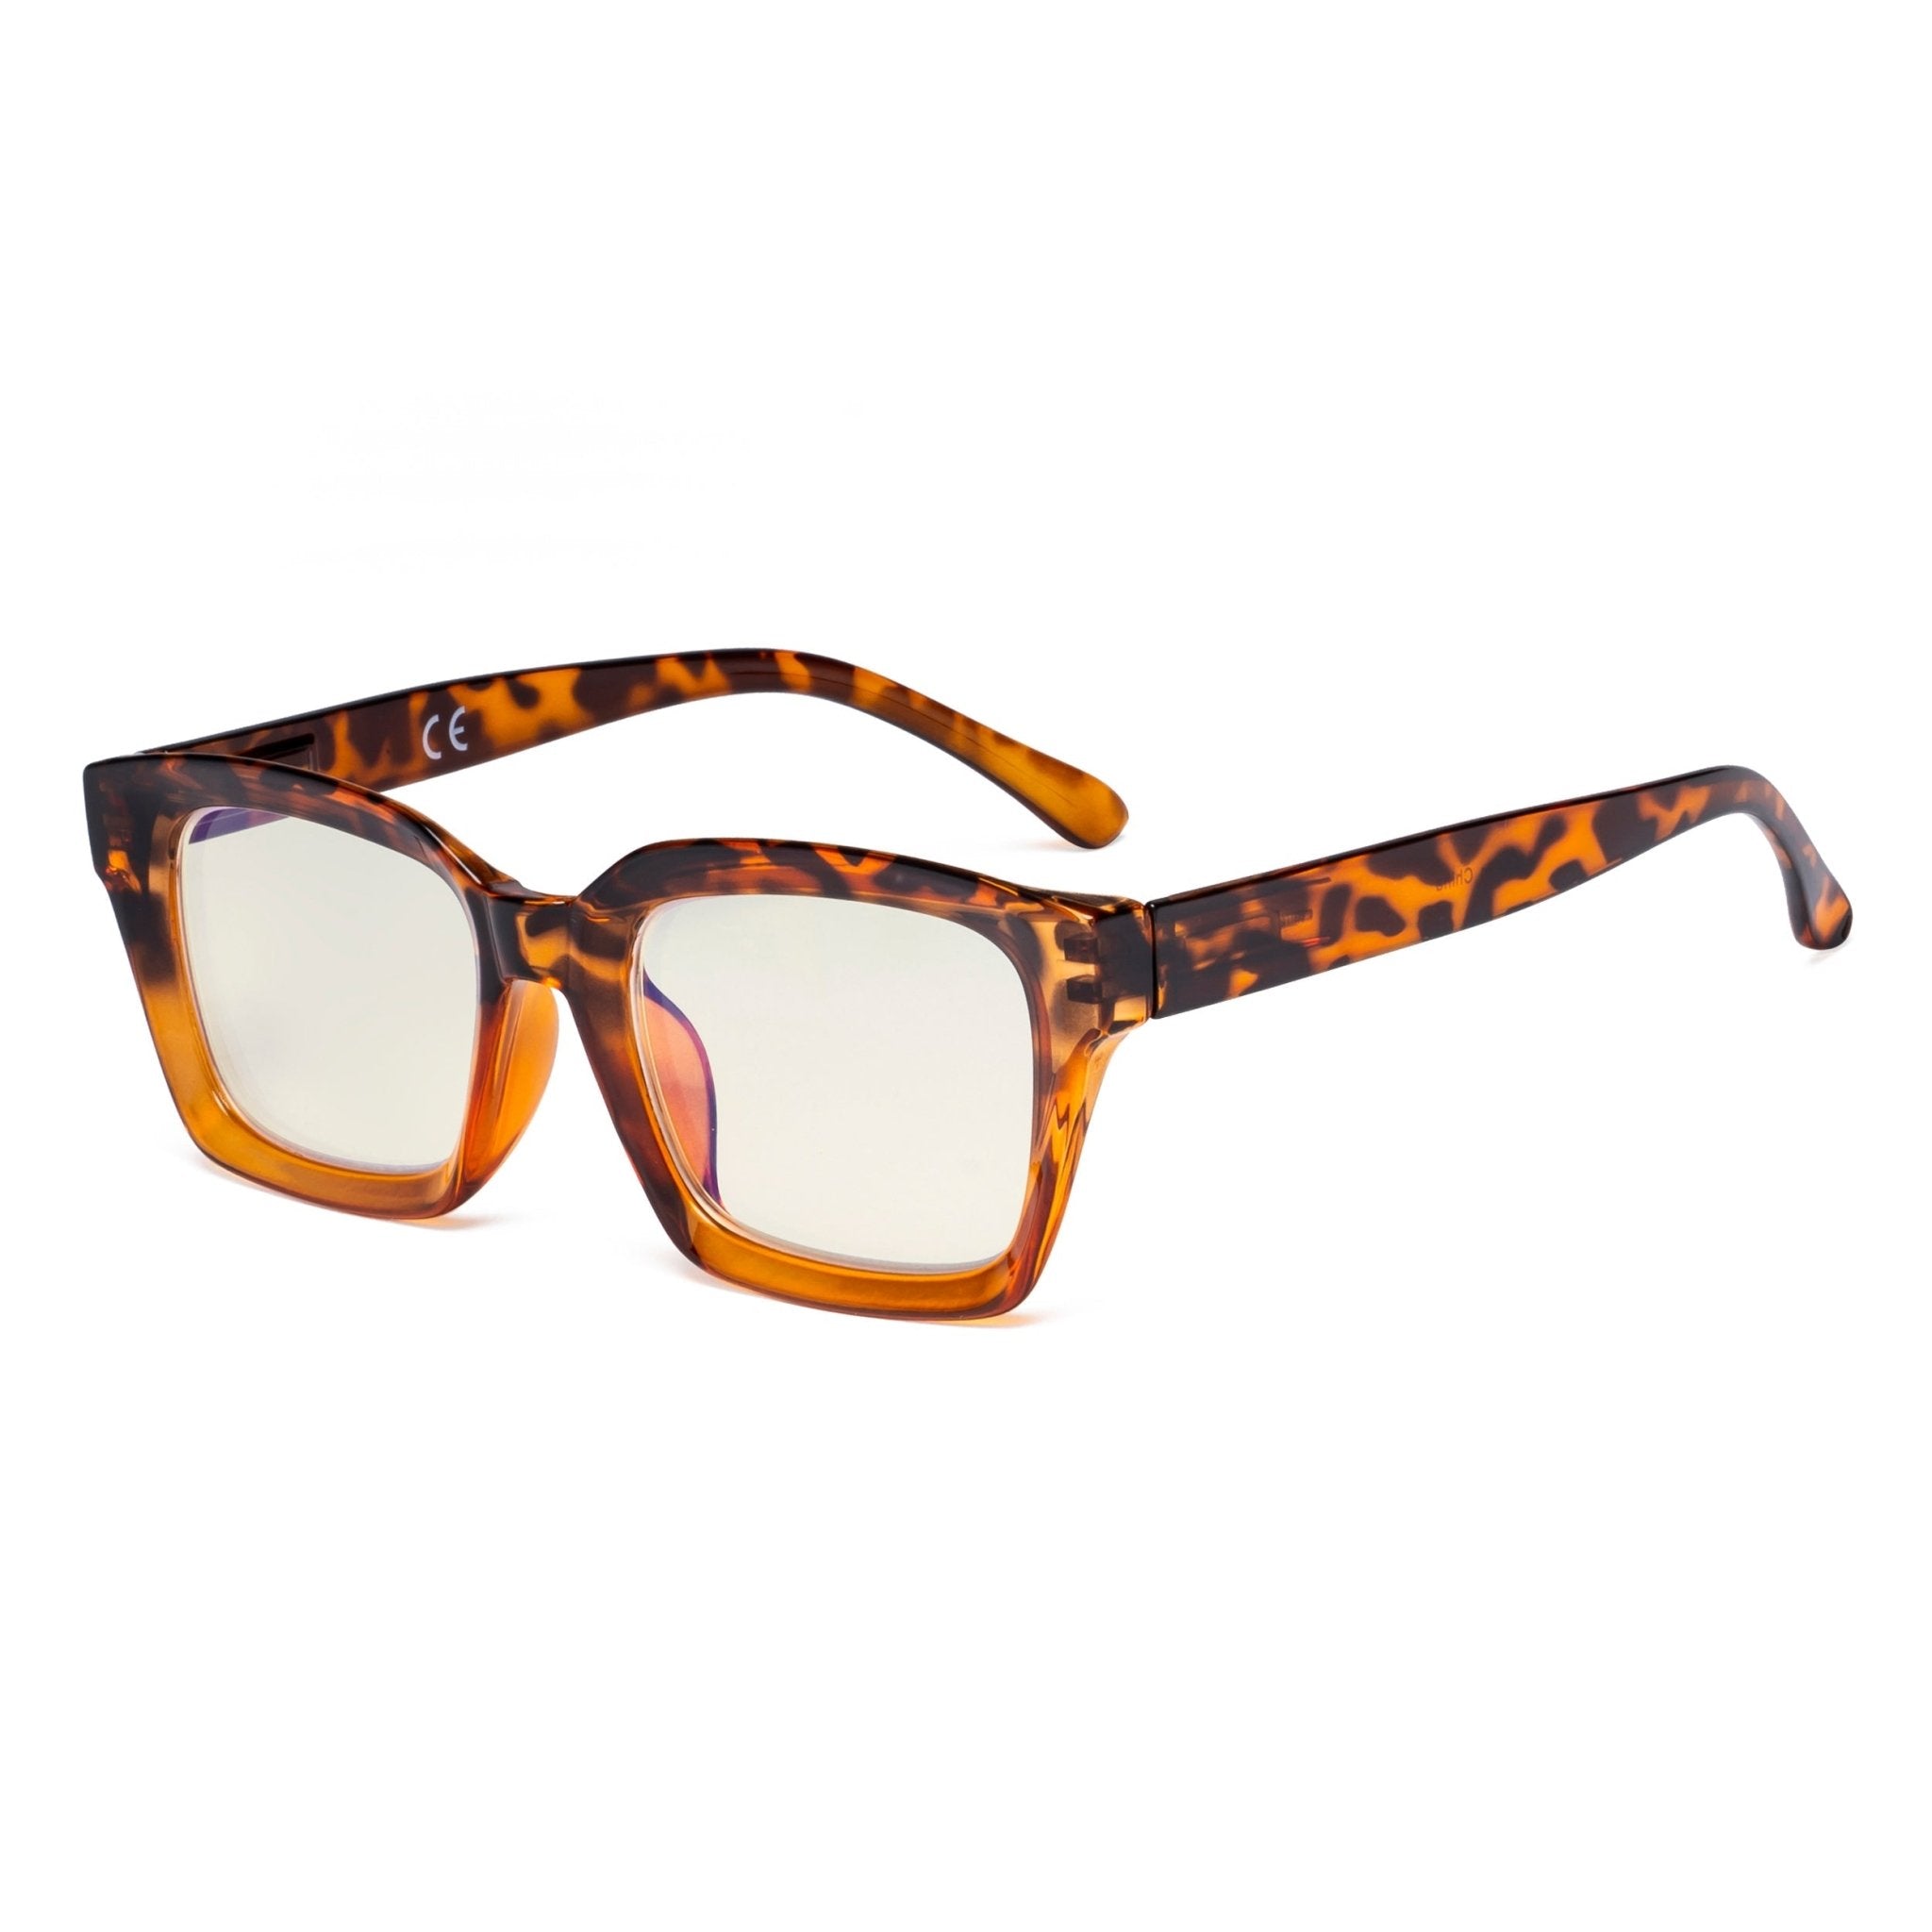 Classic Funky Modern Retro Style READING GLASSES READERS, 44% OFF